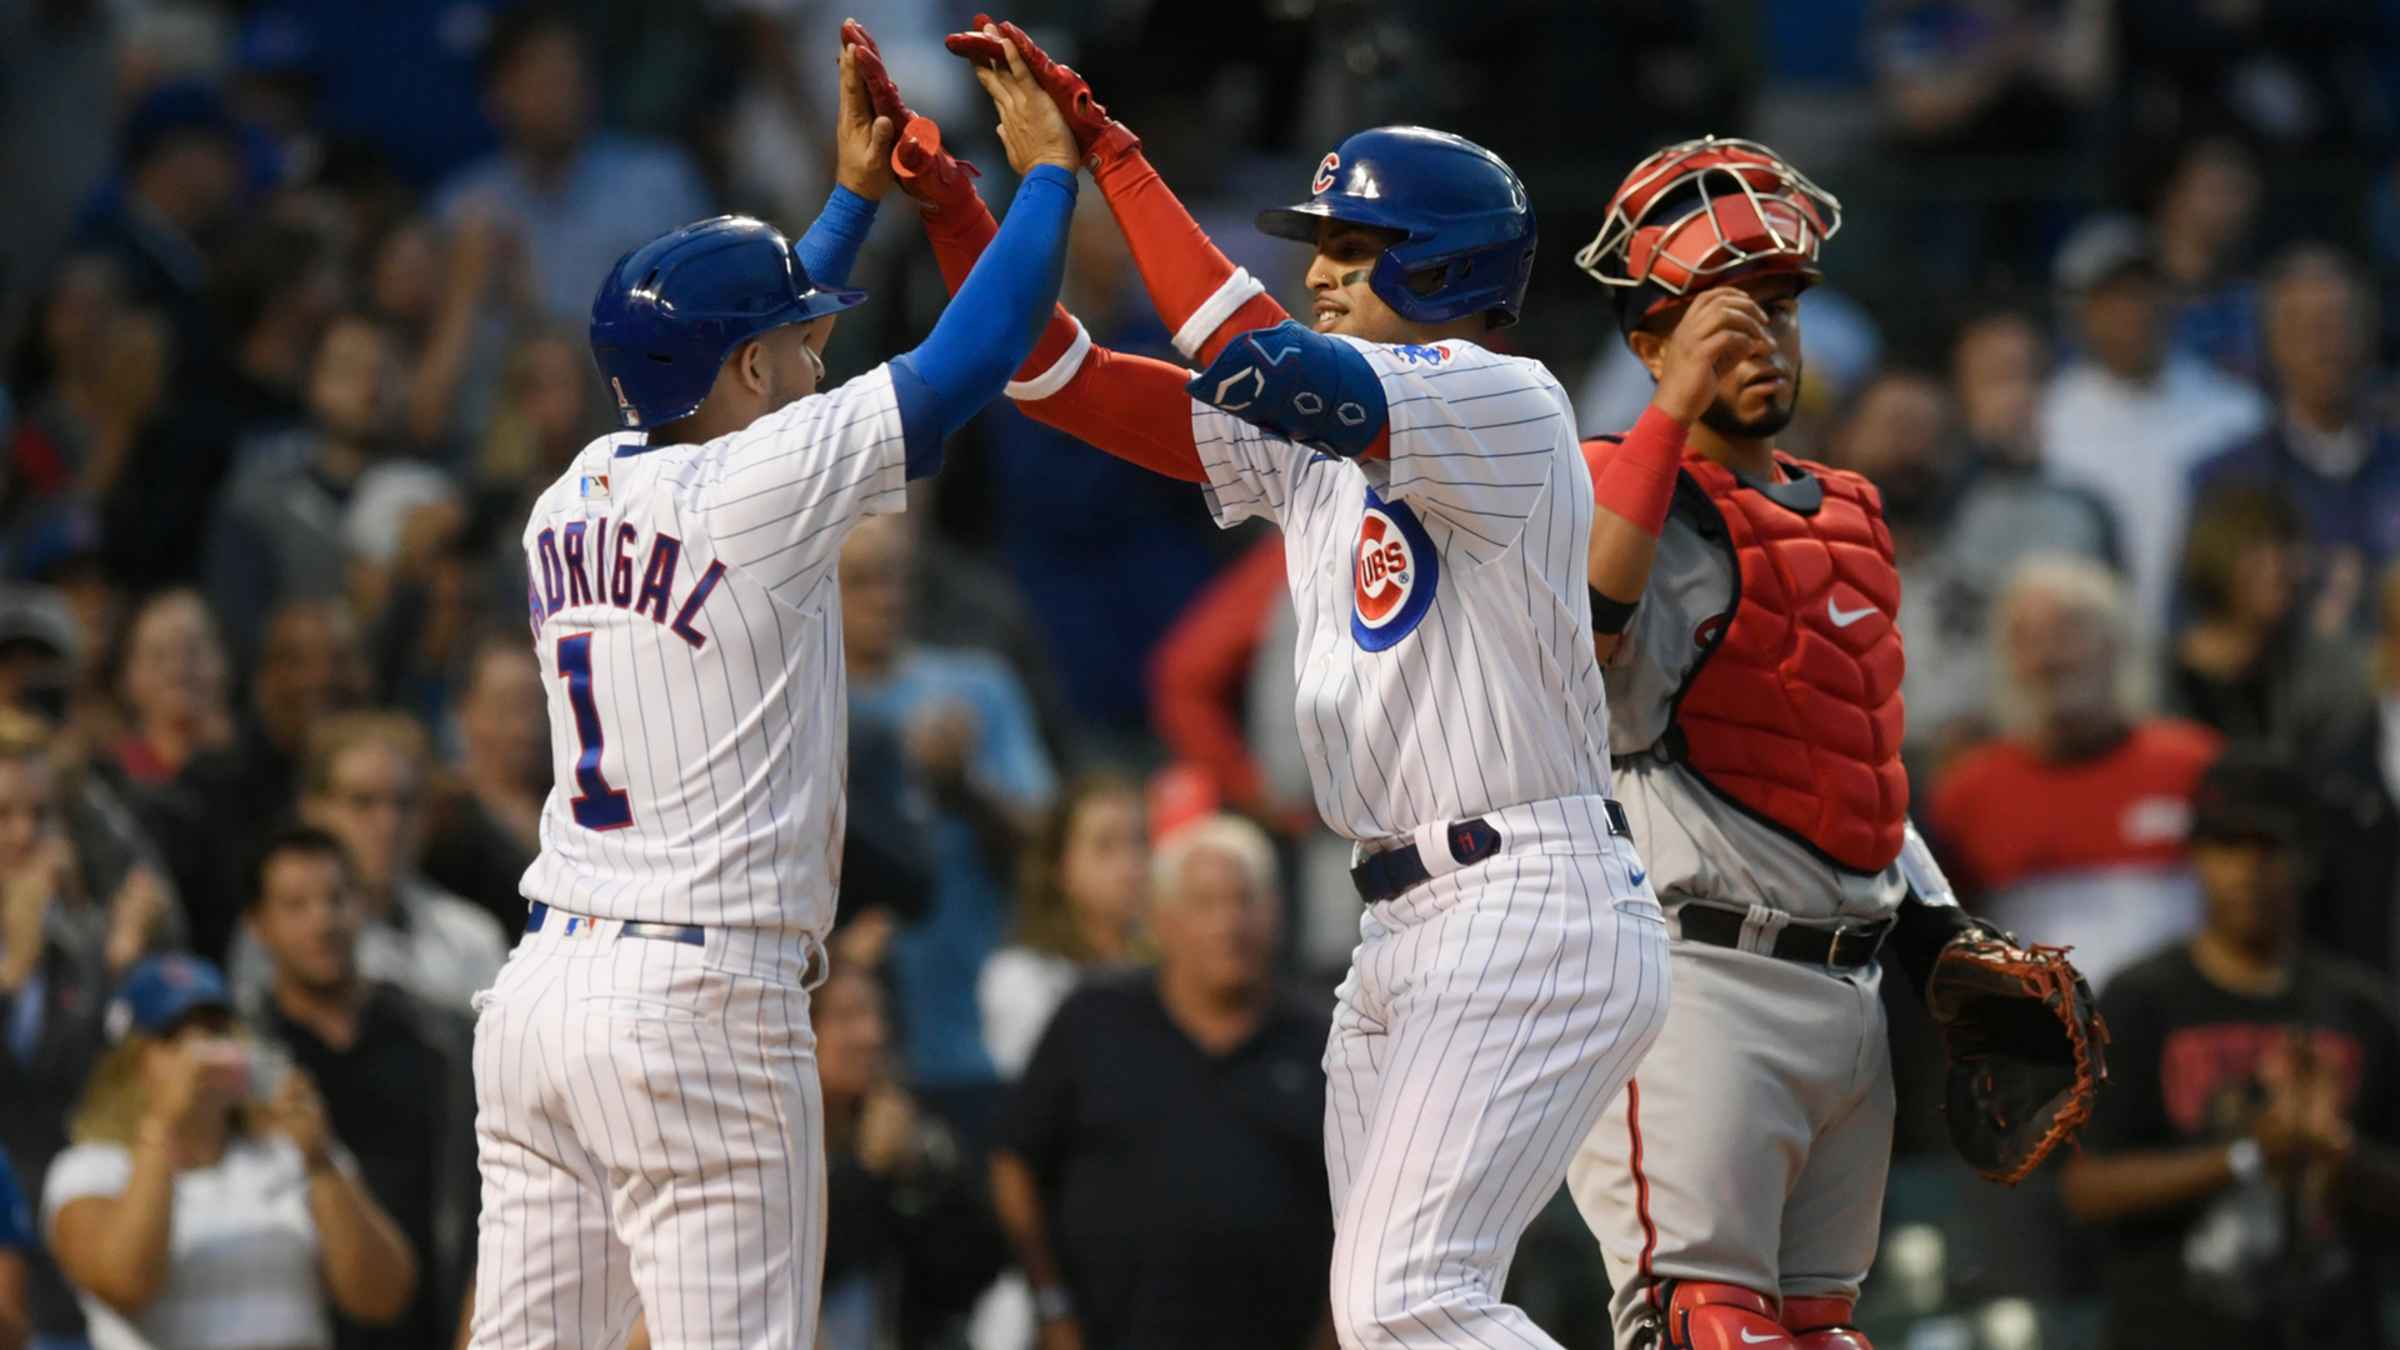 Cubs players, staff explain what made Jason Heyward so special